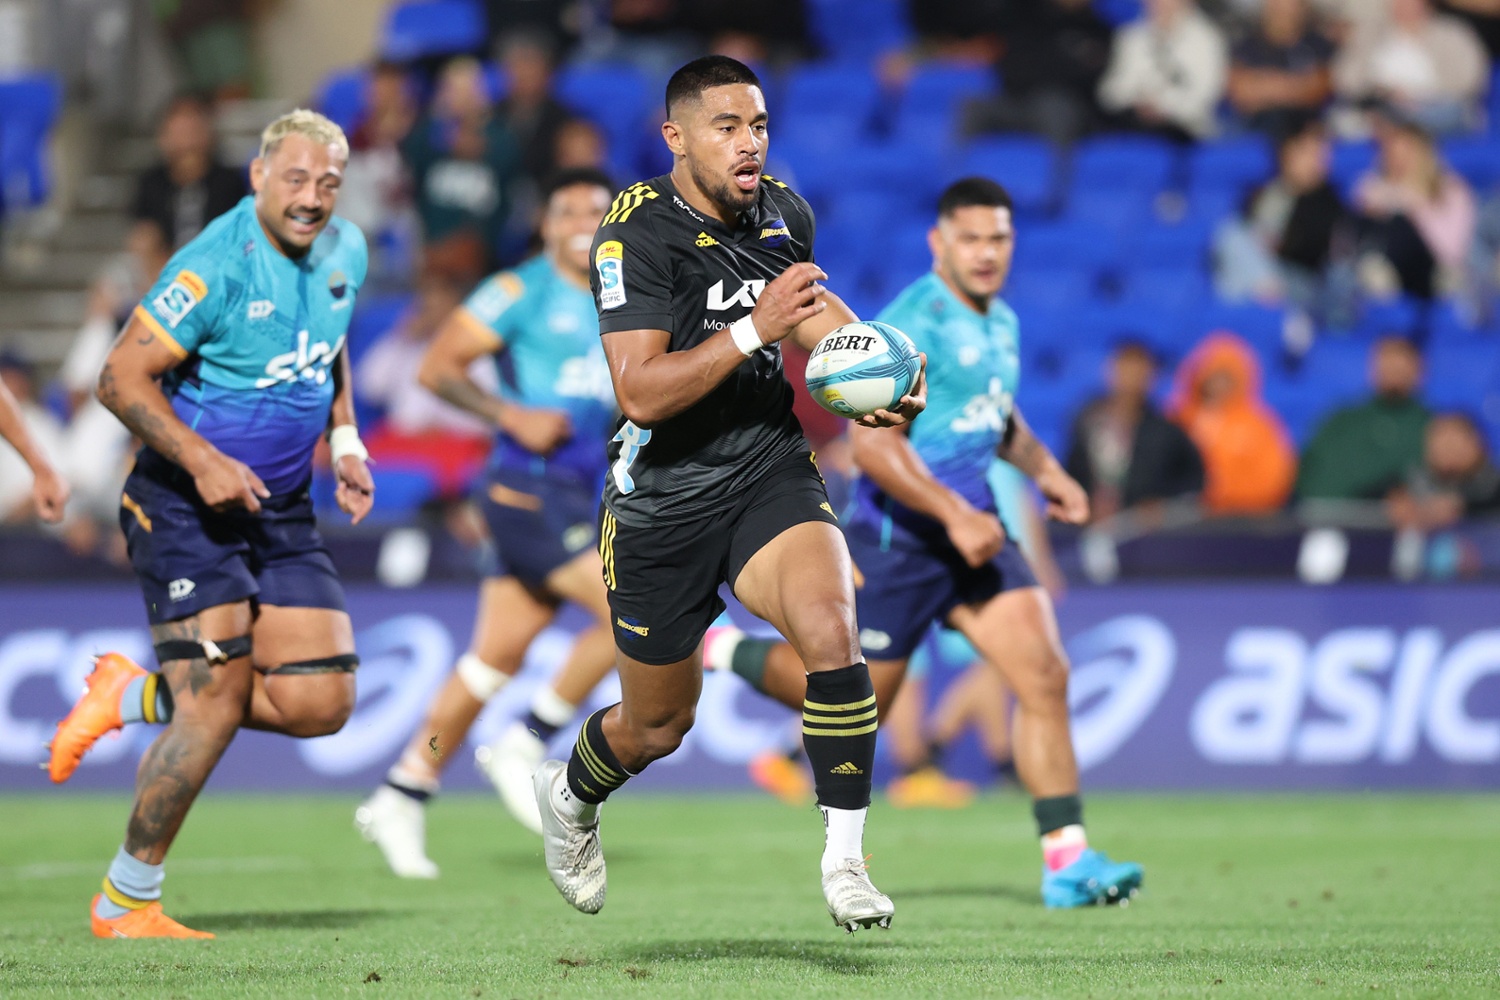 Hurricanes blow away Moana Pasifika in Super Rugby